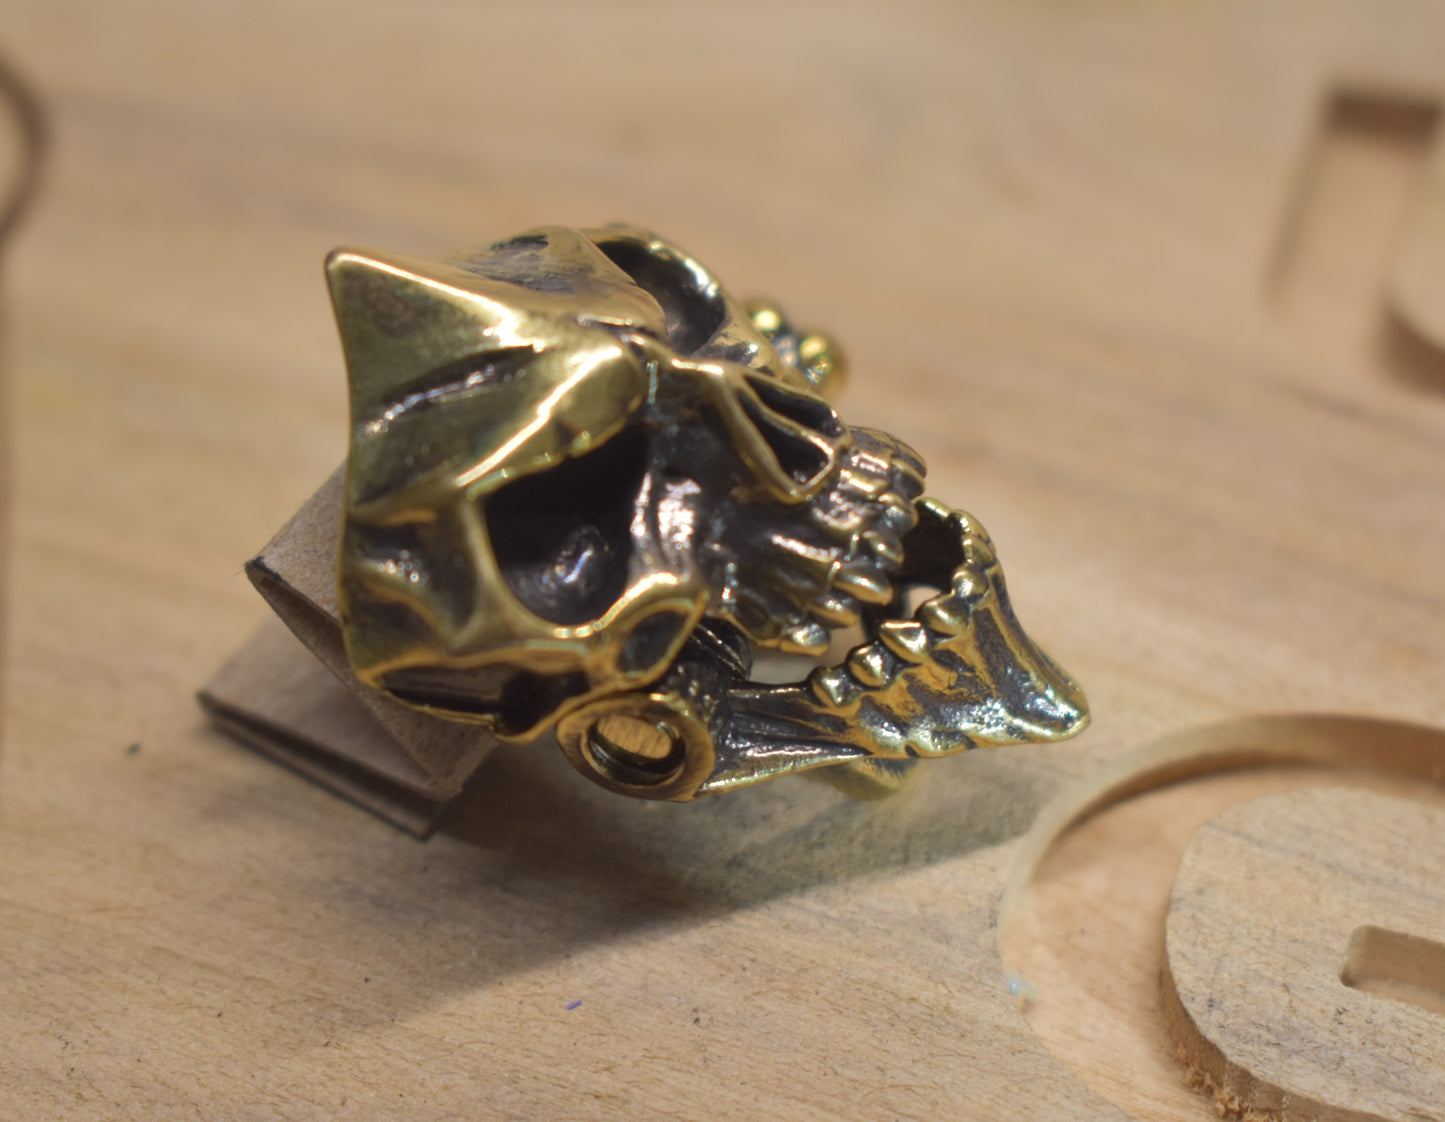 Indian Chief Skull Clasp